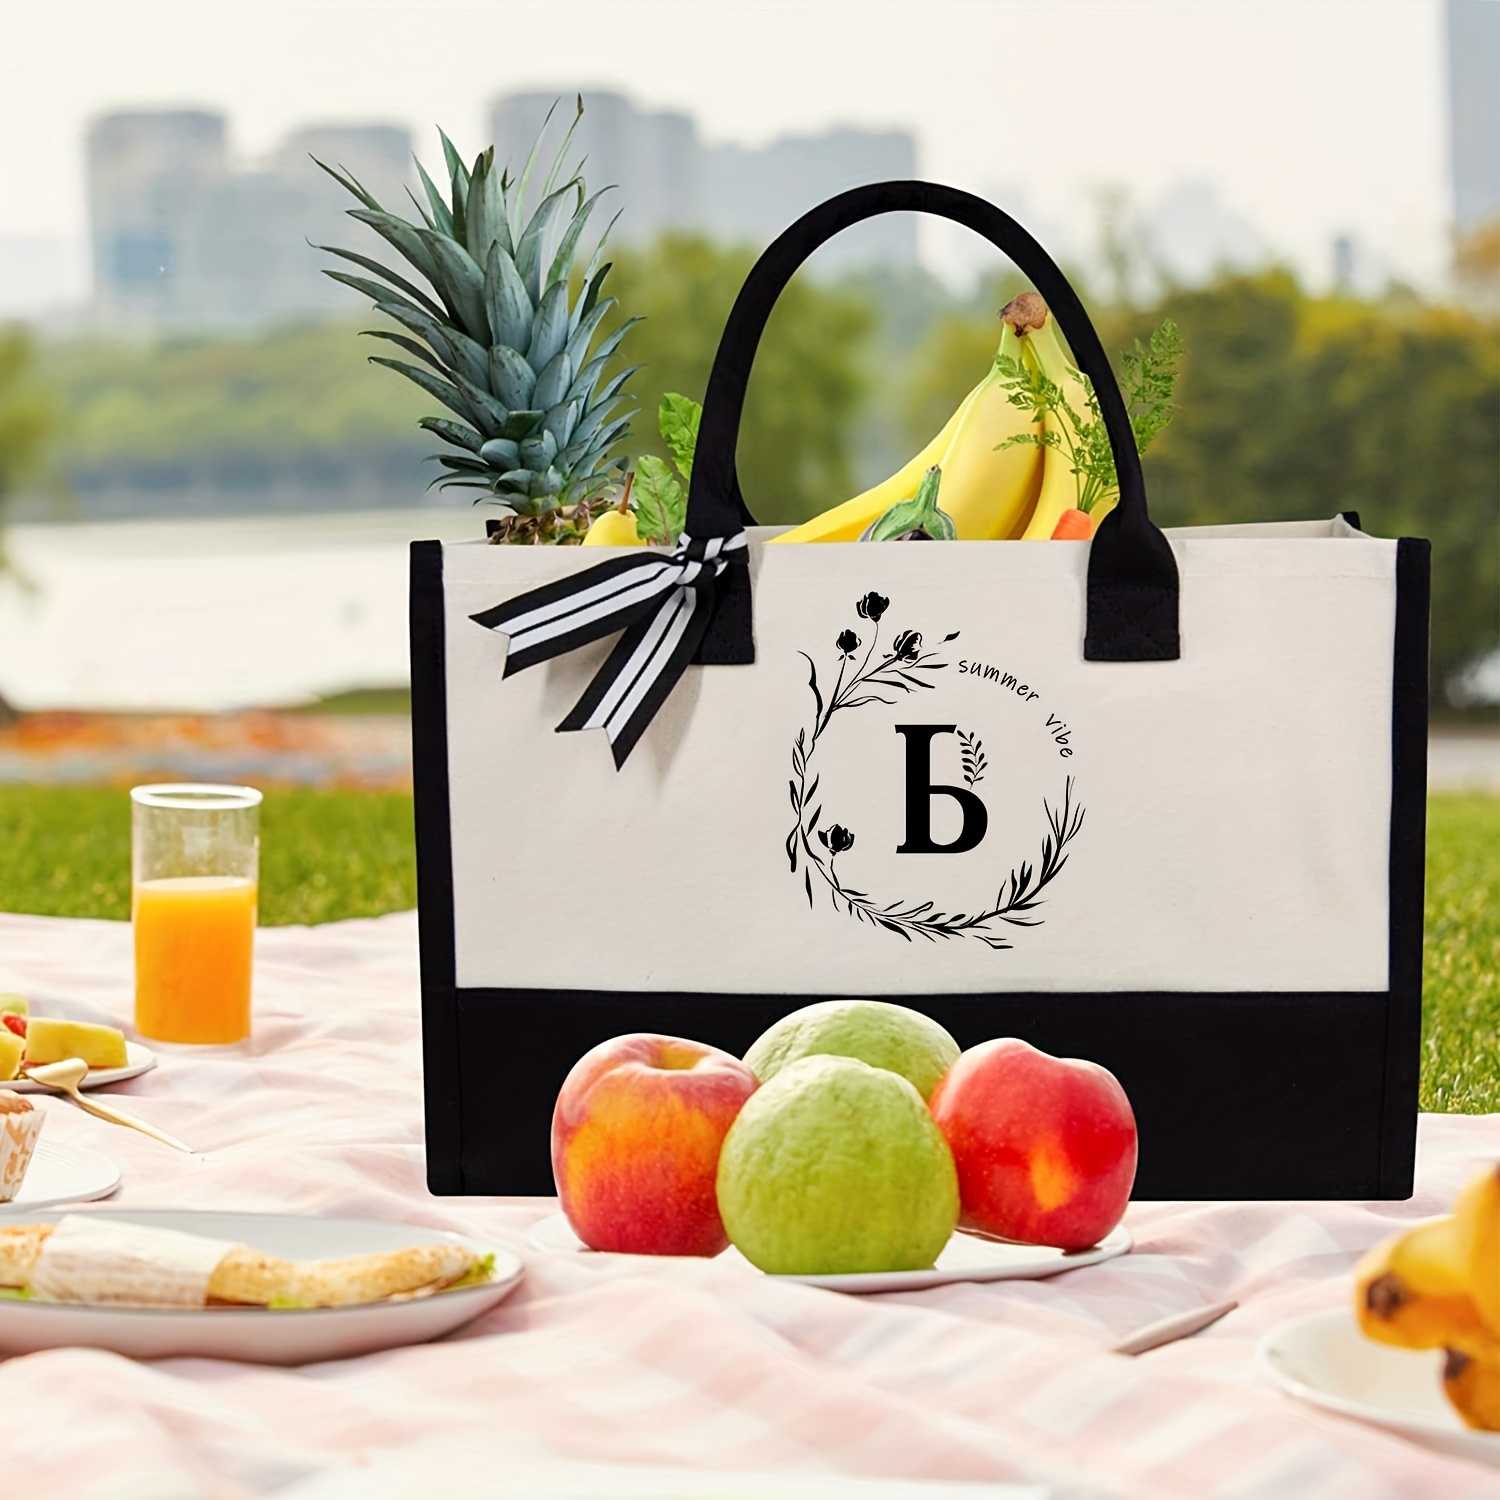 MONOGRAMMED INITIAL CANVAS TOTE BAG